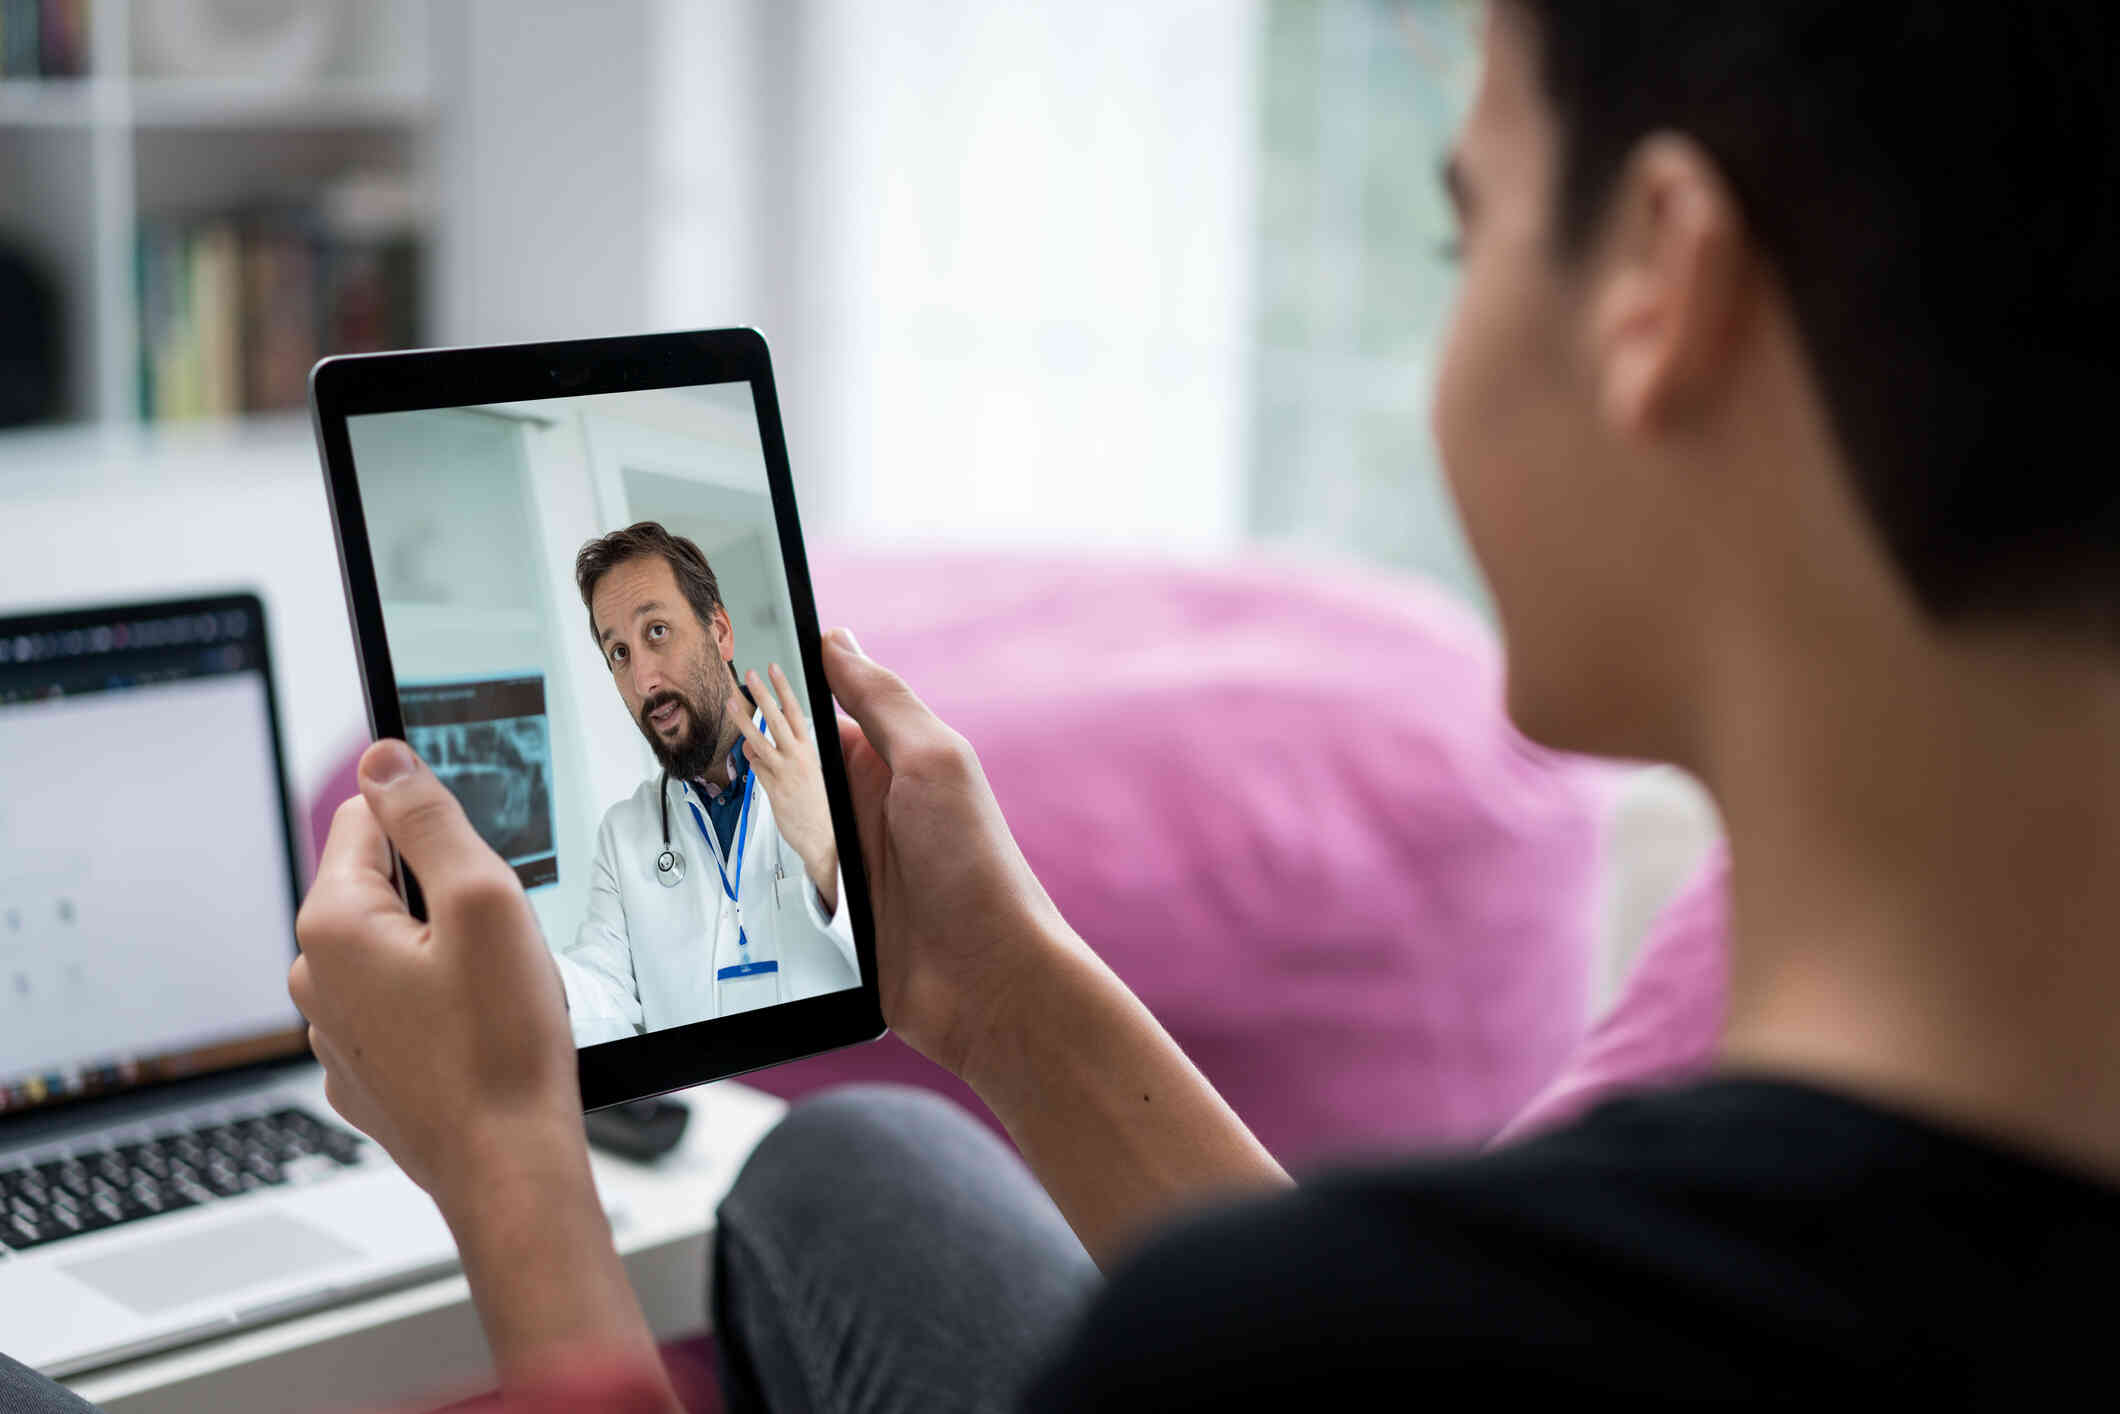 A close up of a woman talking to her male doctor on the tablet in her hands during a telehealth video call.